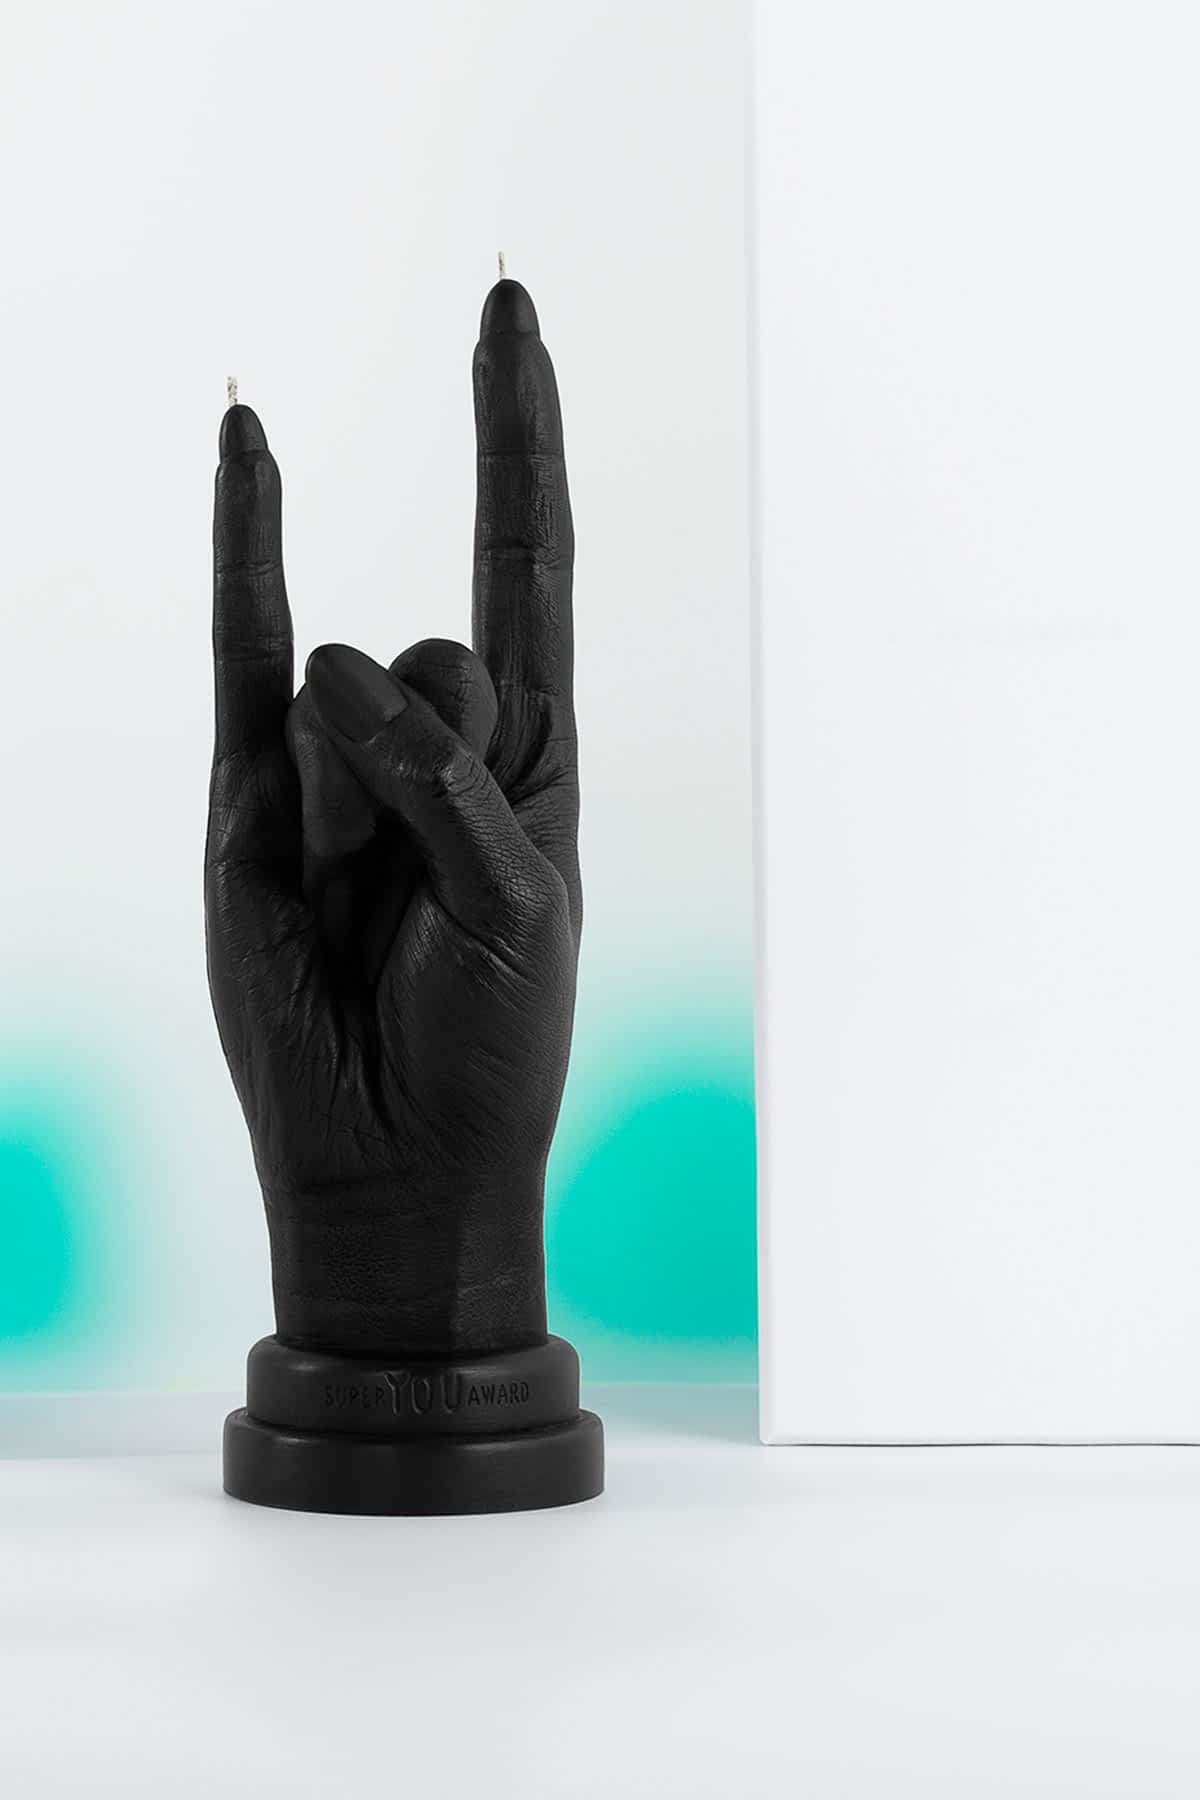 ⚡︎-SUPER-YOU-AWARD-cool-unique-gift-idea-empowering-hand-gesture-collectible-decorative-black-candle-YOU-ROCK-1-Aivaras-Simonis-photo-MOB